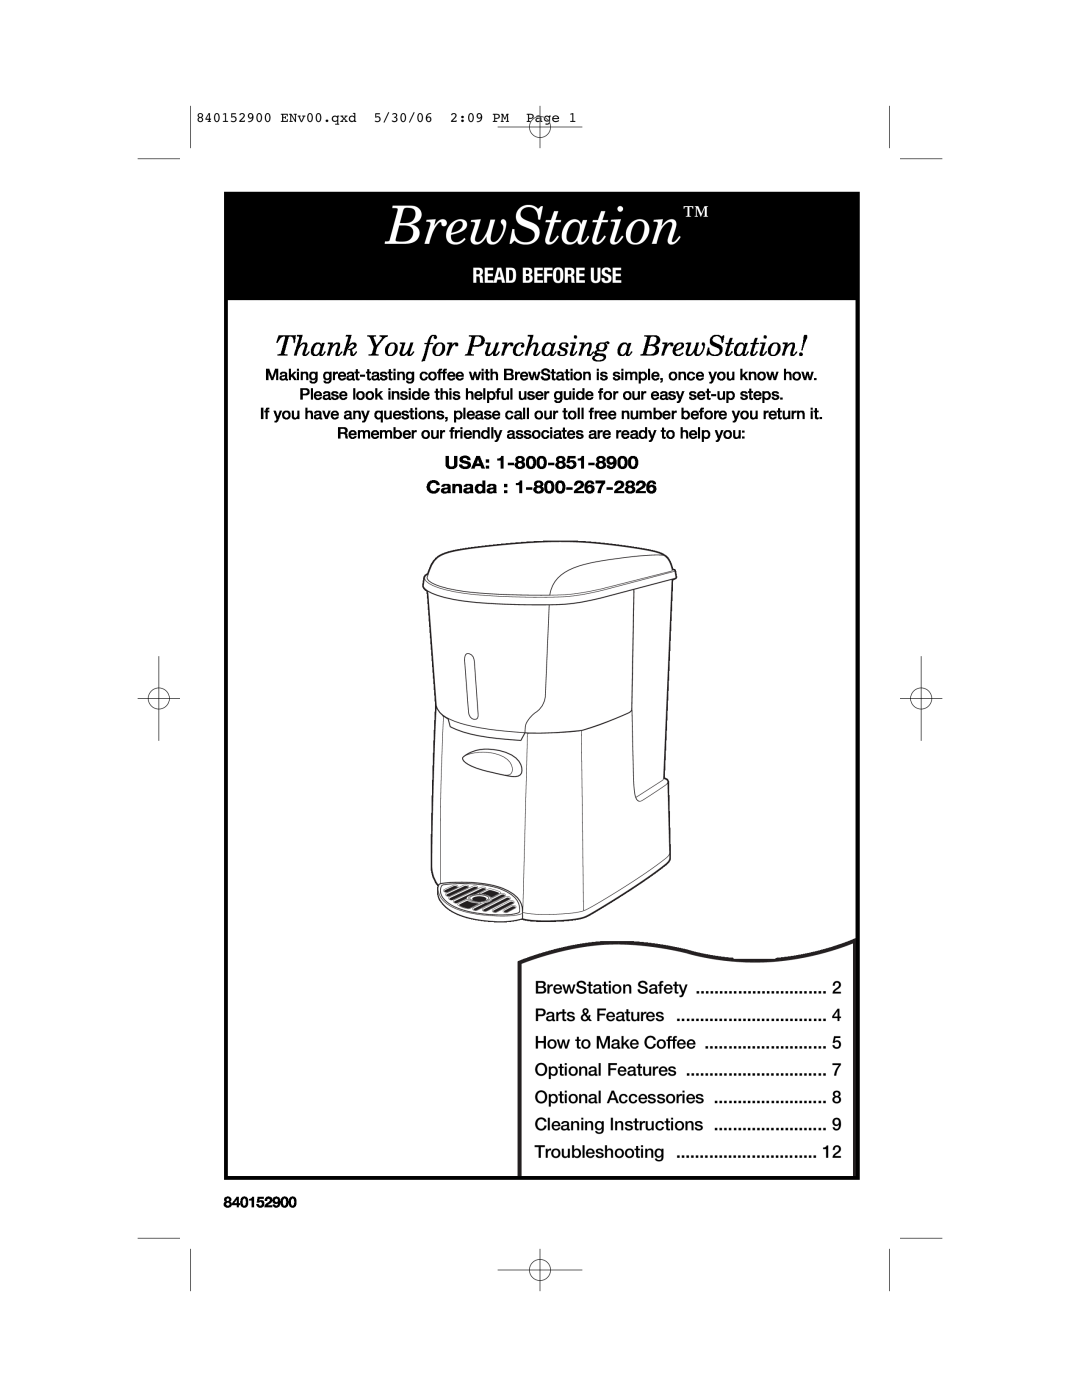 Hamilton Beach 47535C manual Thank You for Purchasing a BrewStation, Read Before Use, USA Canada 